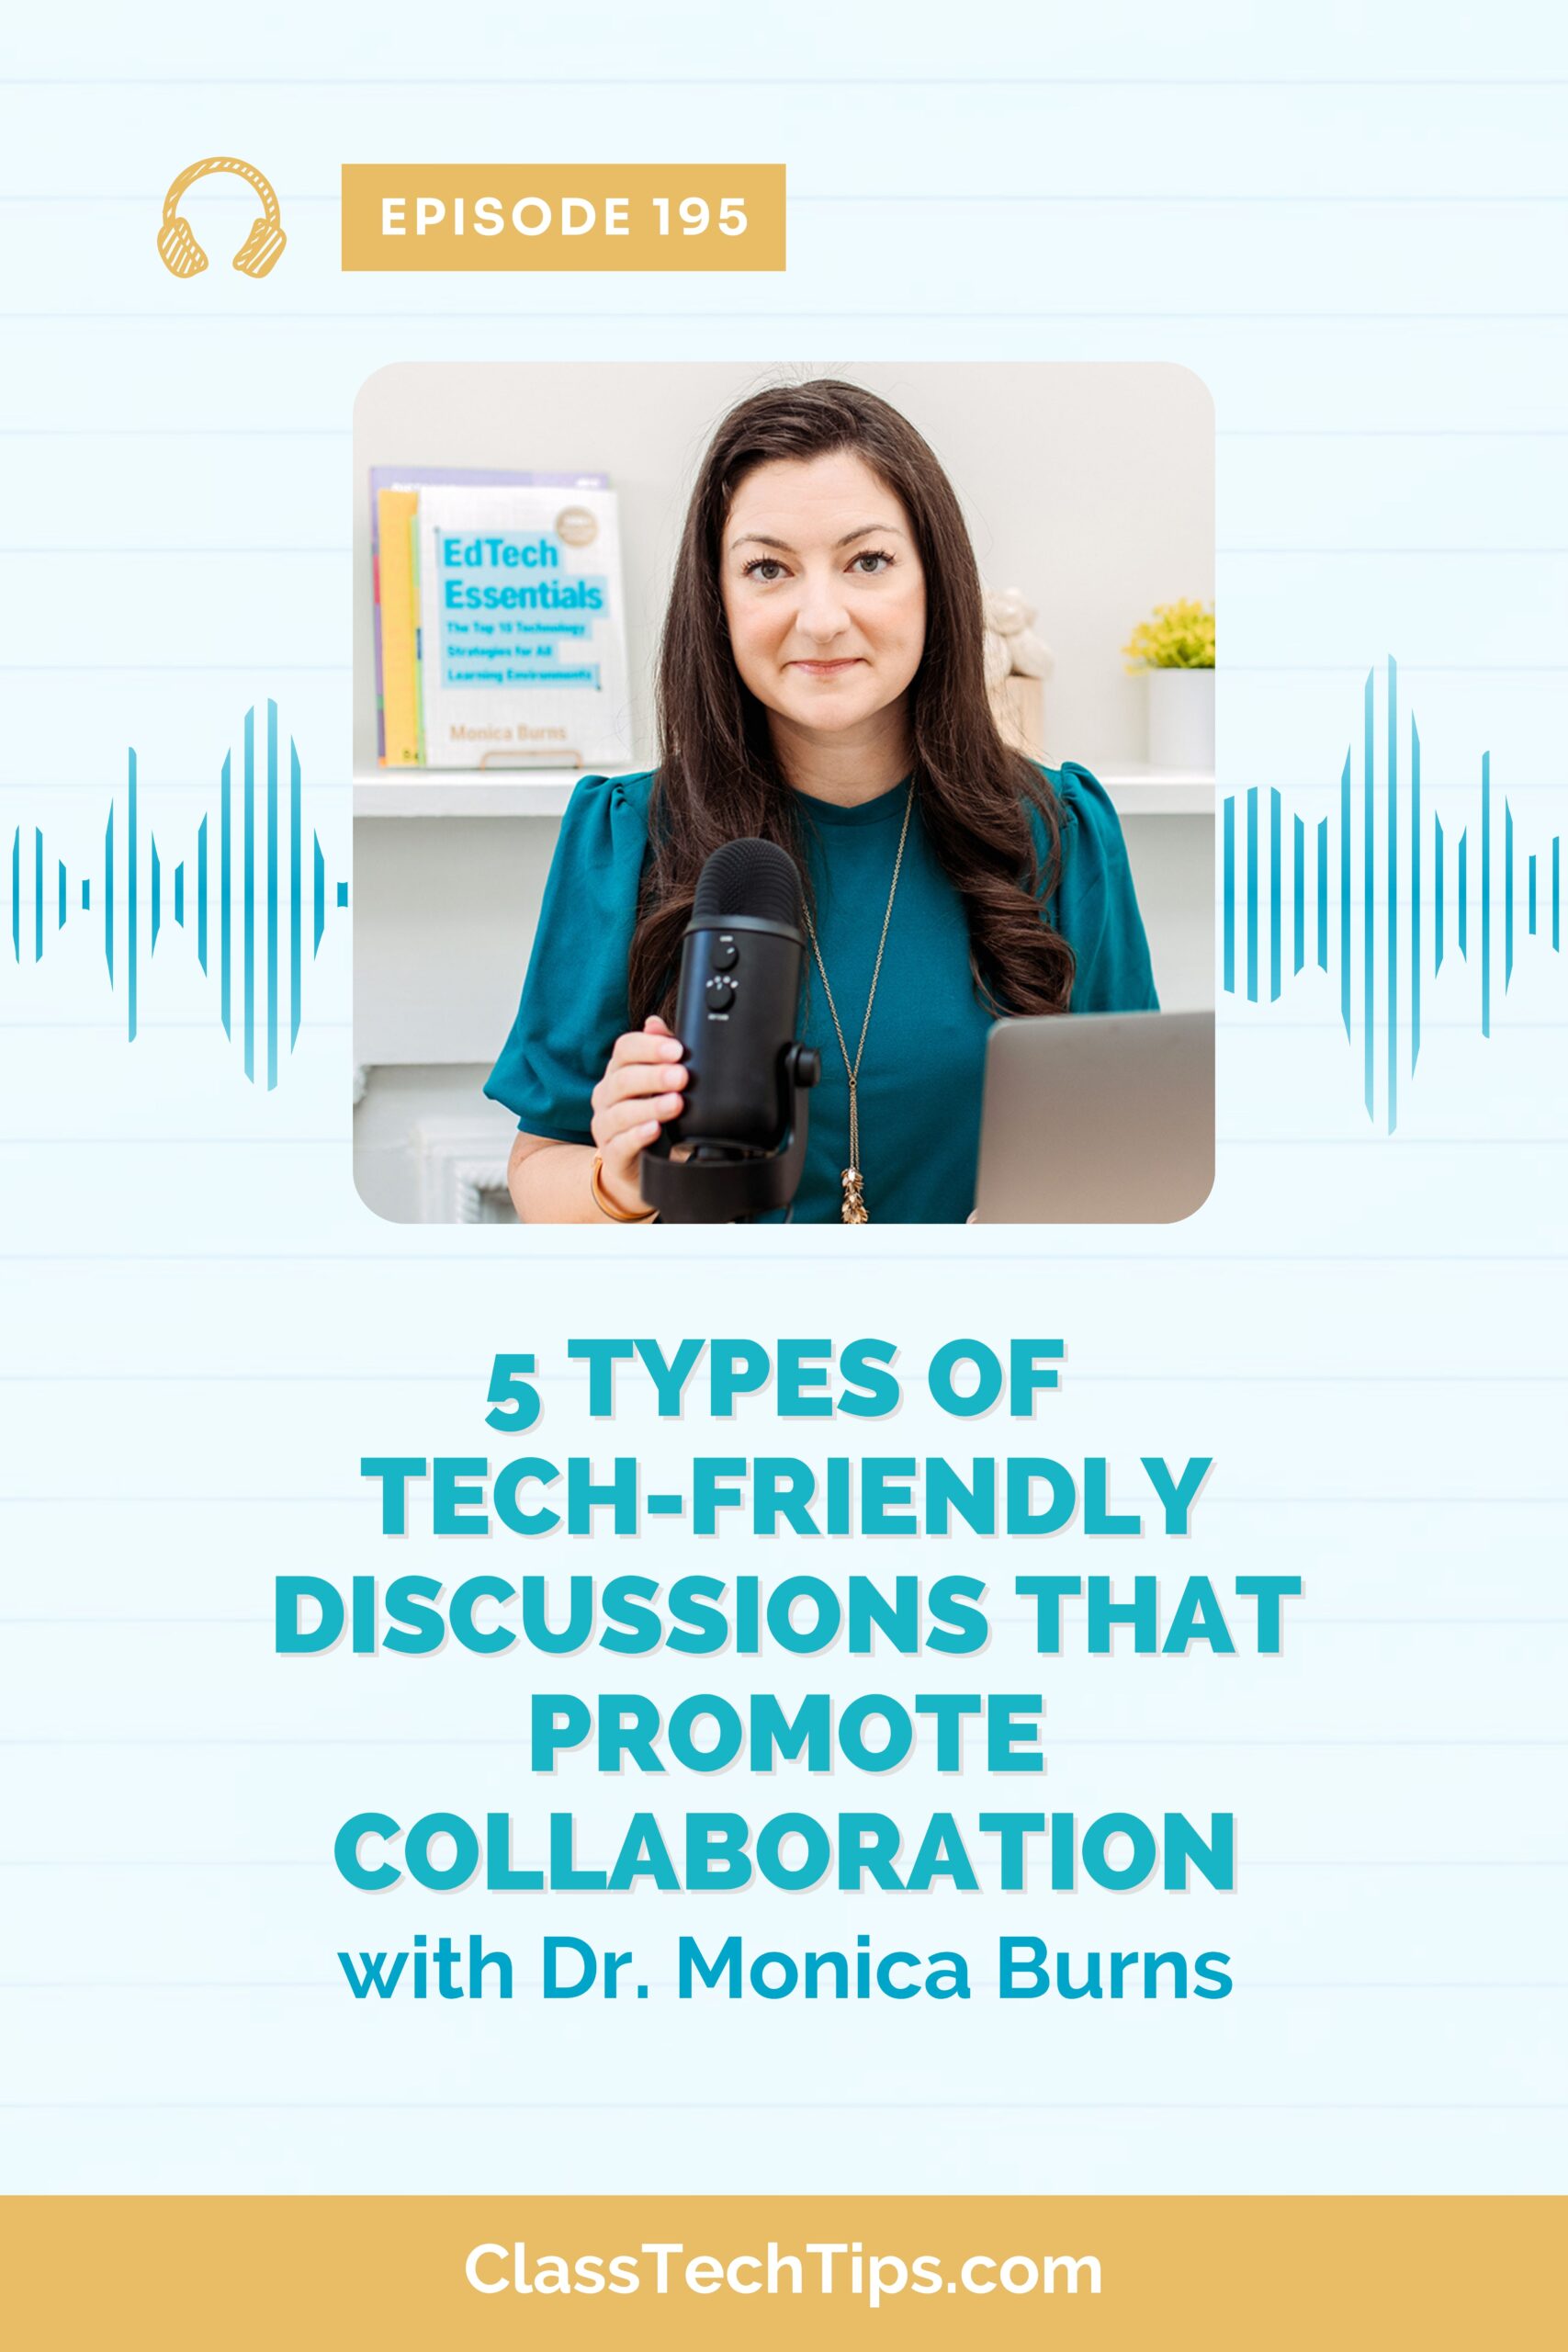 5 Types of Tech-Friendly Discussions That Promote Collaboration - Vertical